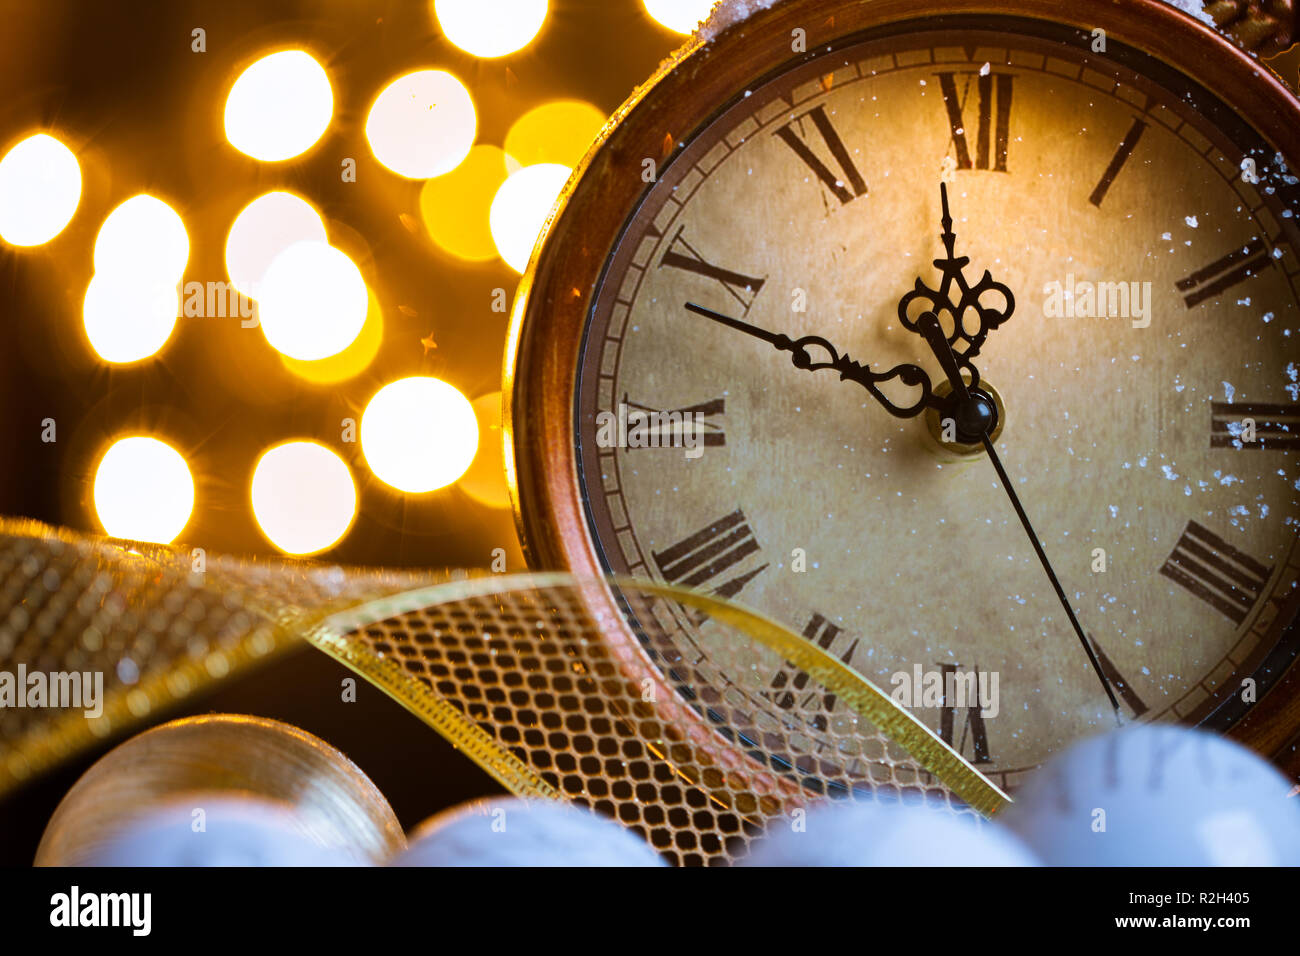 New Years clock and white balls covered with lights Stock Photo